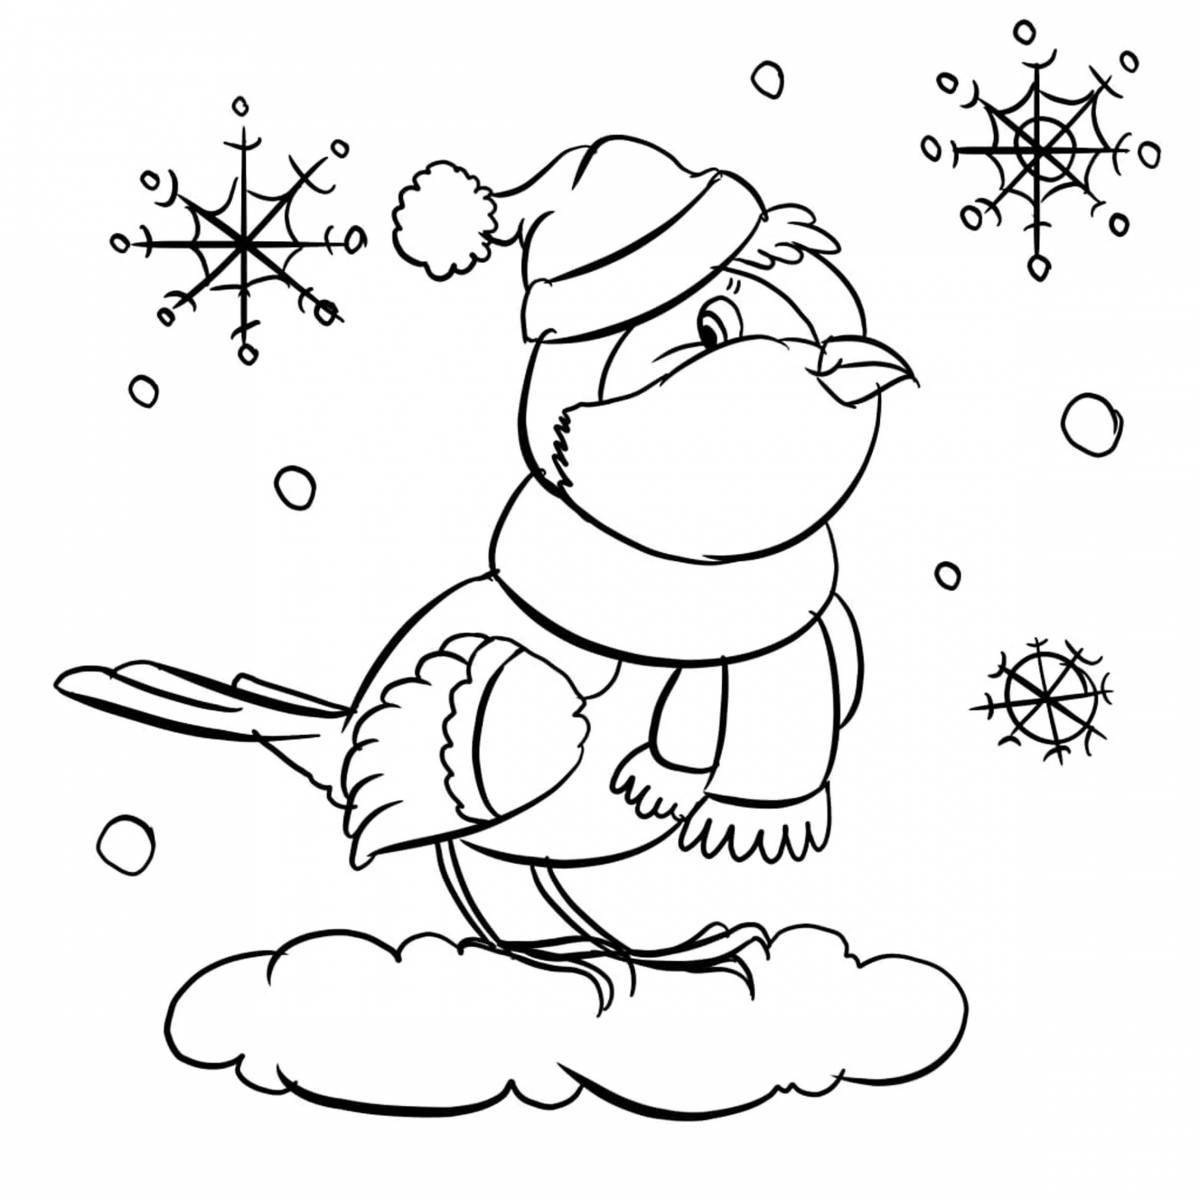 Glowing bullfinch coloring page